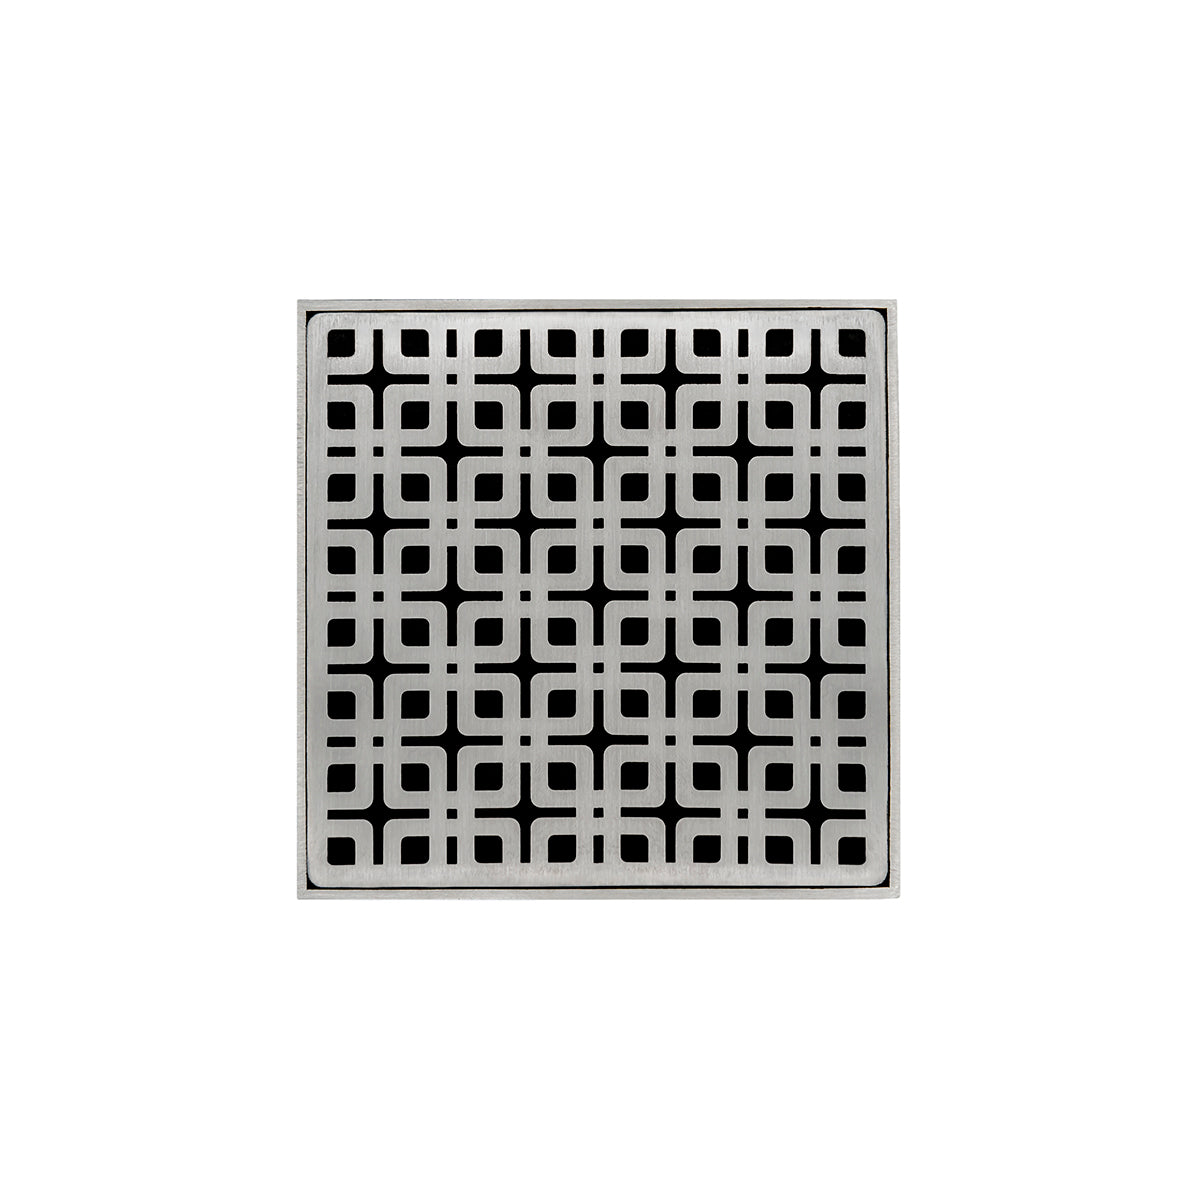 Infinity Drain 5" x 5" KD 5 High Flow Premium Center Drain Kit with Link Pattern Decorative Plate with PVC Drain Body, 3" Outlet